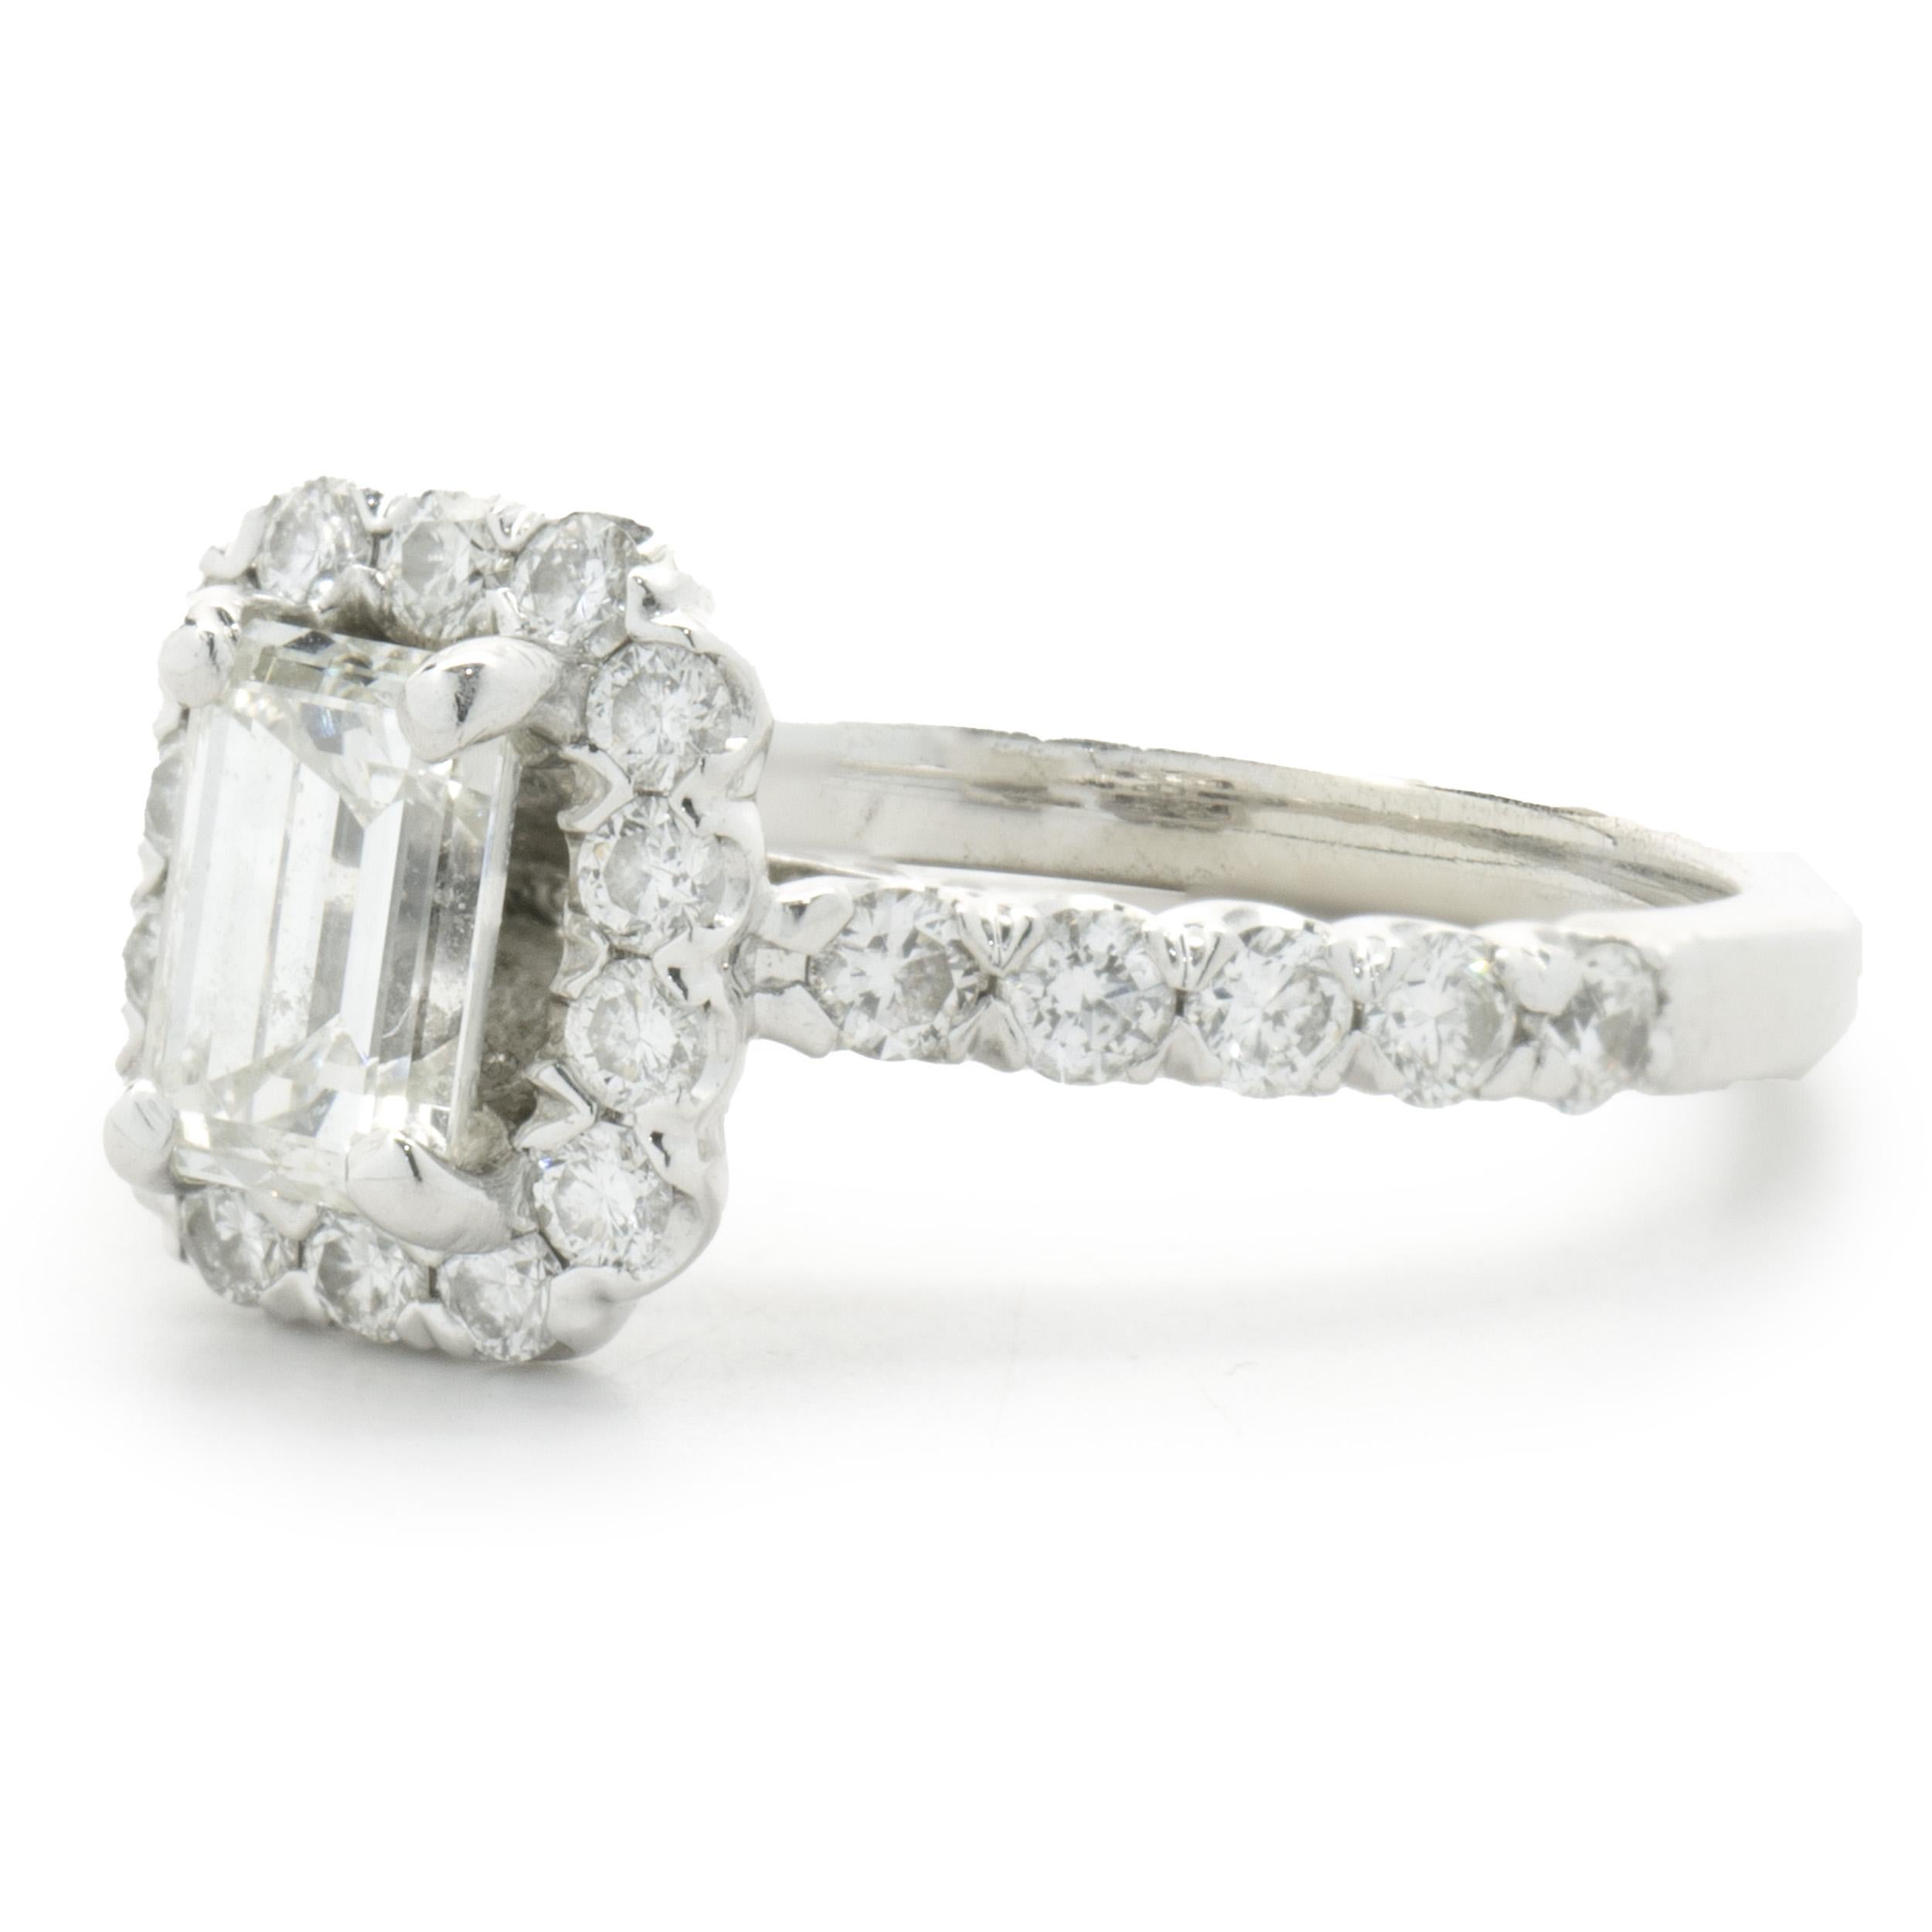 Designer: Custom
Material: 14K white gold
Center Diamond: 1 emerald cut = 0.50cttw
Color: J
Clarity: SI1
Diamond: 52 round brilliant cut = 0.60cttw
Color: H
Clarity: SI1-2
Dimensions: ring top measures 9.9mm wide
Ring Size: 6.5 (complimentary sizing